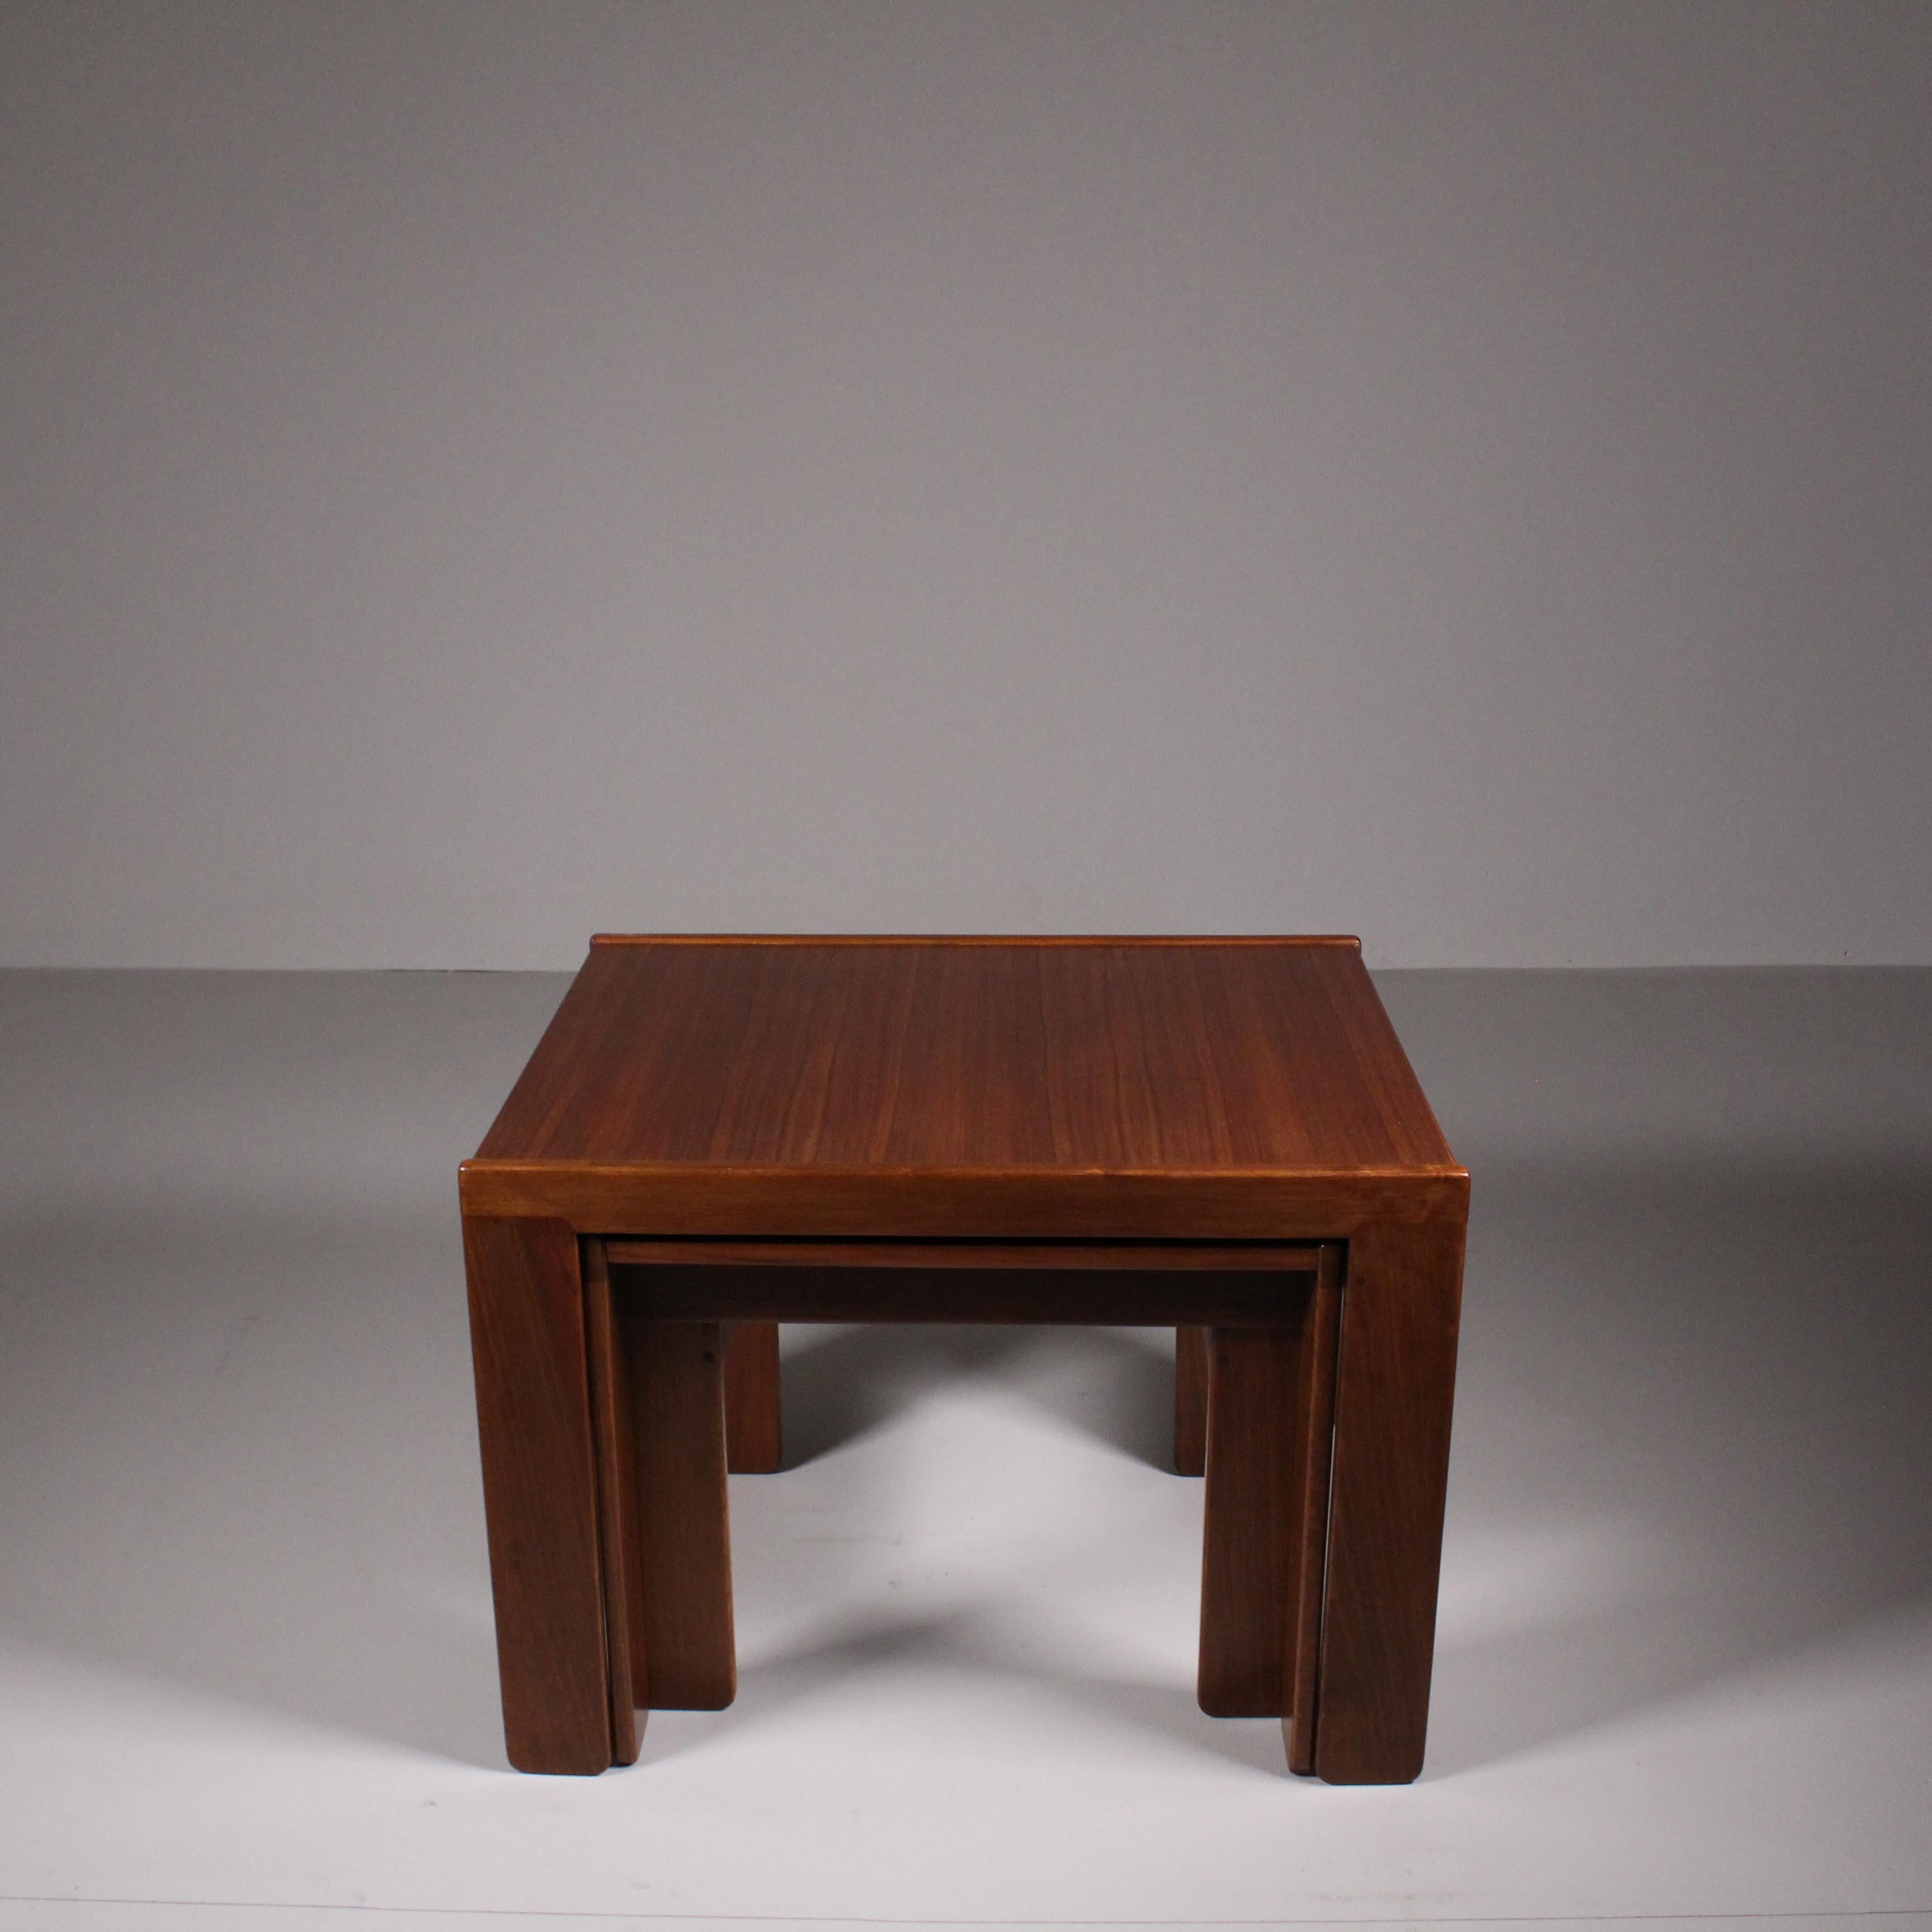 Small tables model 777, Afra and Tobia Scarpa, 1965 Circa In Excellent Condition For Sale In Milano, Lombardia